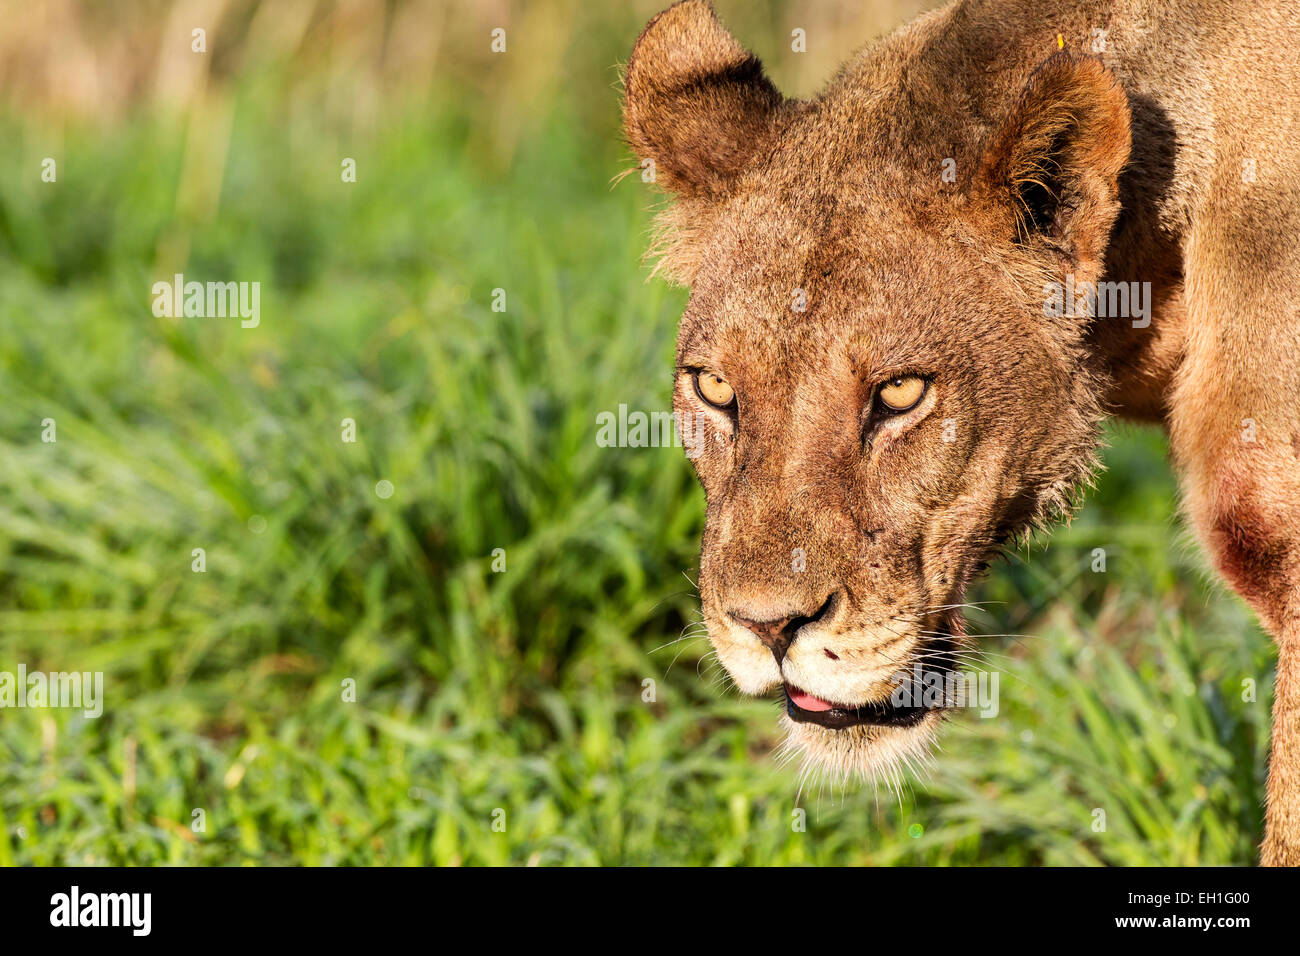 A lioness staring intensely Stock Photo